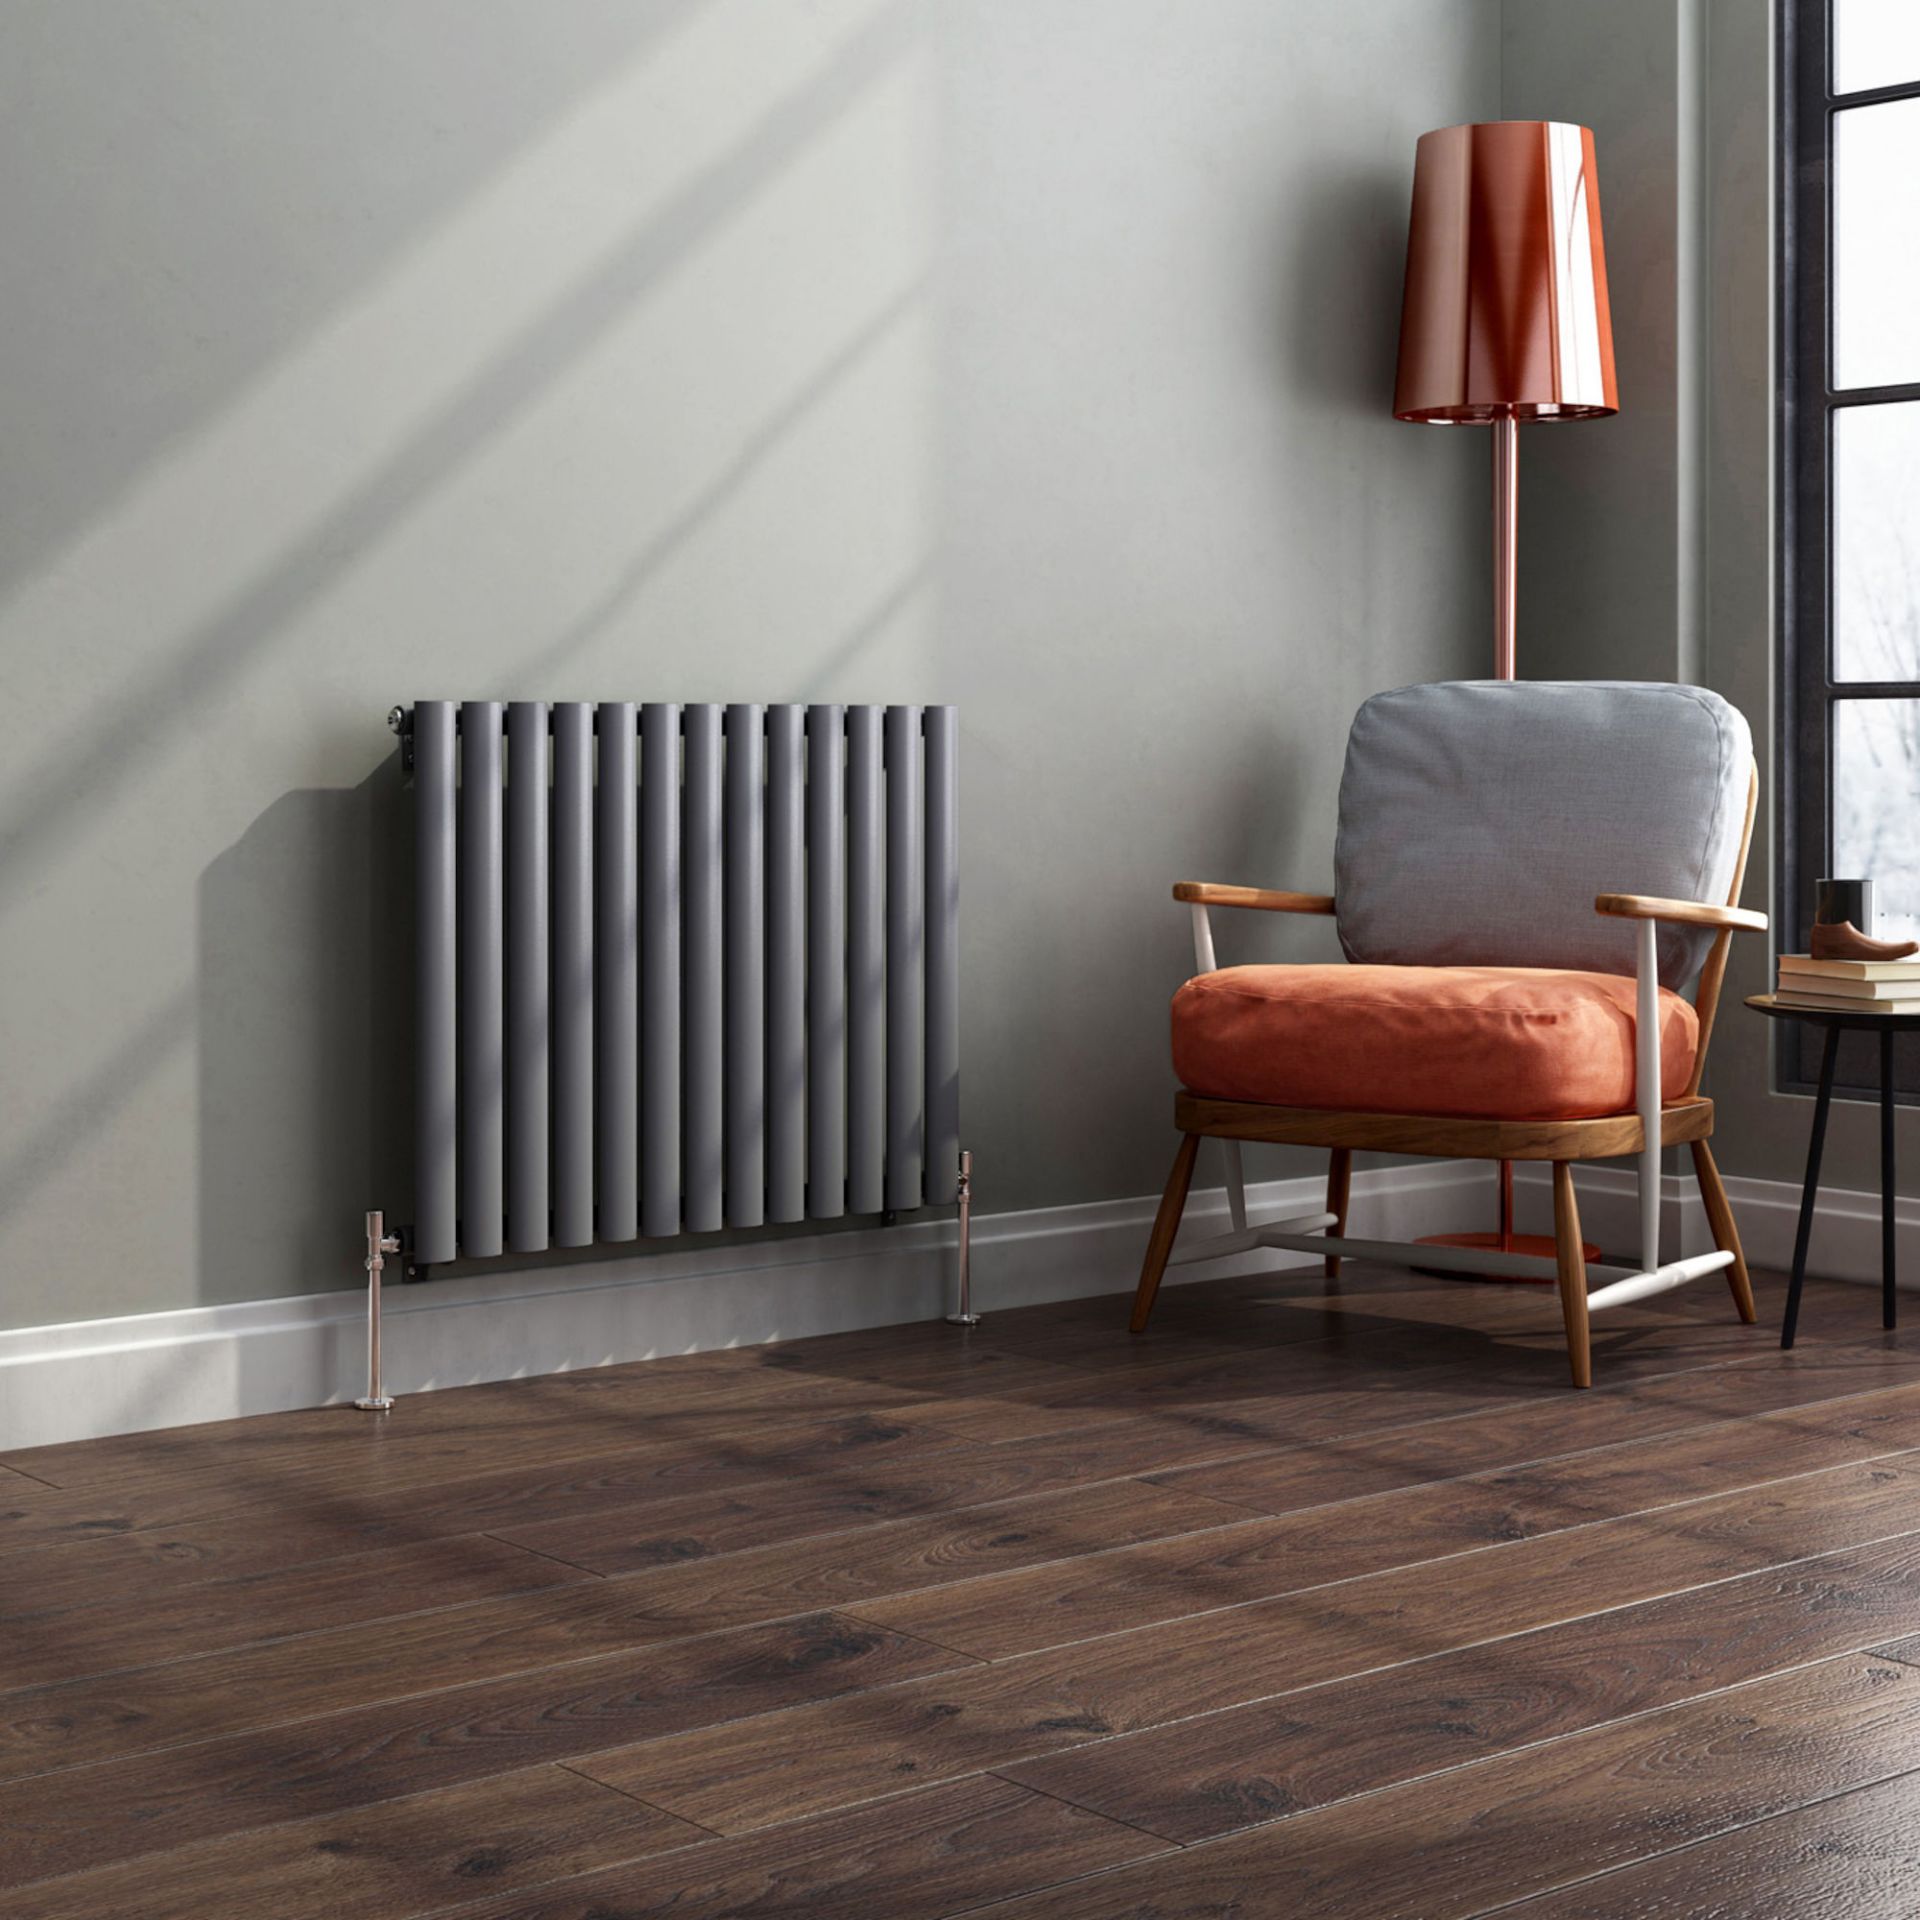 (KL41) 600x780mm Anthracite Single Panel Oval Tube Horizontal Radiator. Made from high quality low - Image 2 of 3